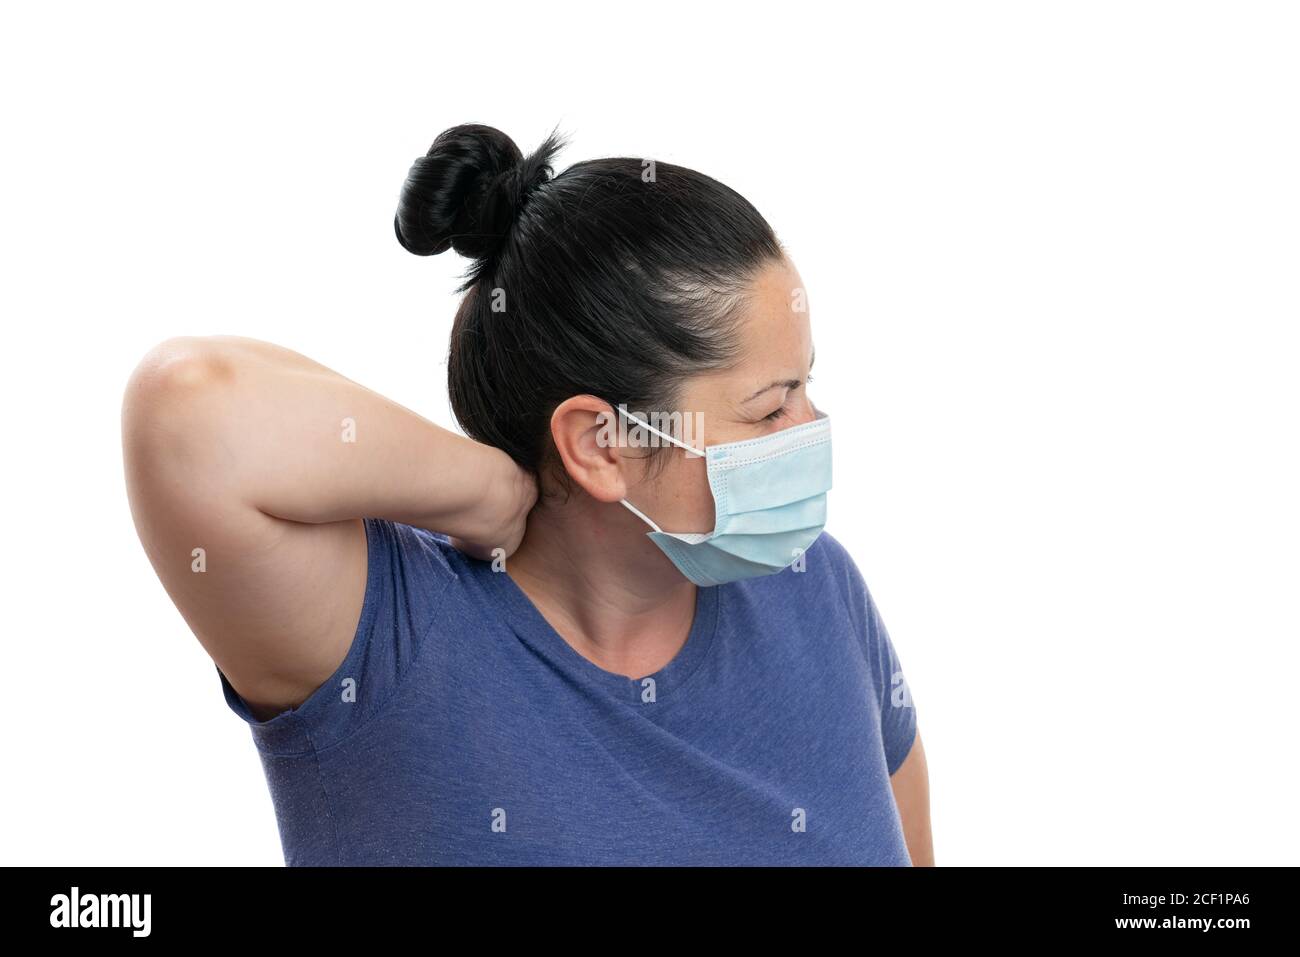 Adult female wearing medical or surgical mask touching back of neck with hand as muscular pain covid19 flu virus infection symptom isolated on white s Stock Photo